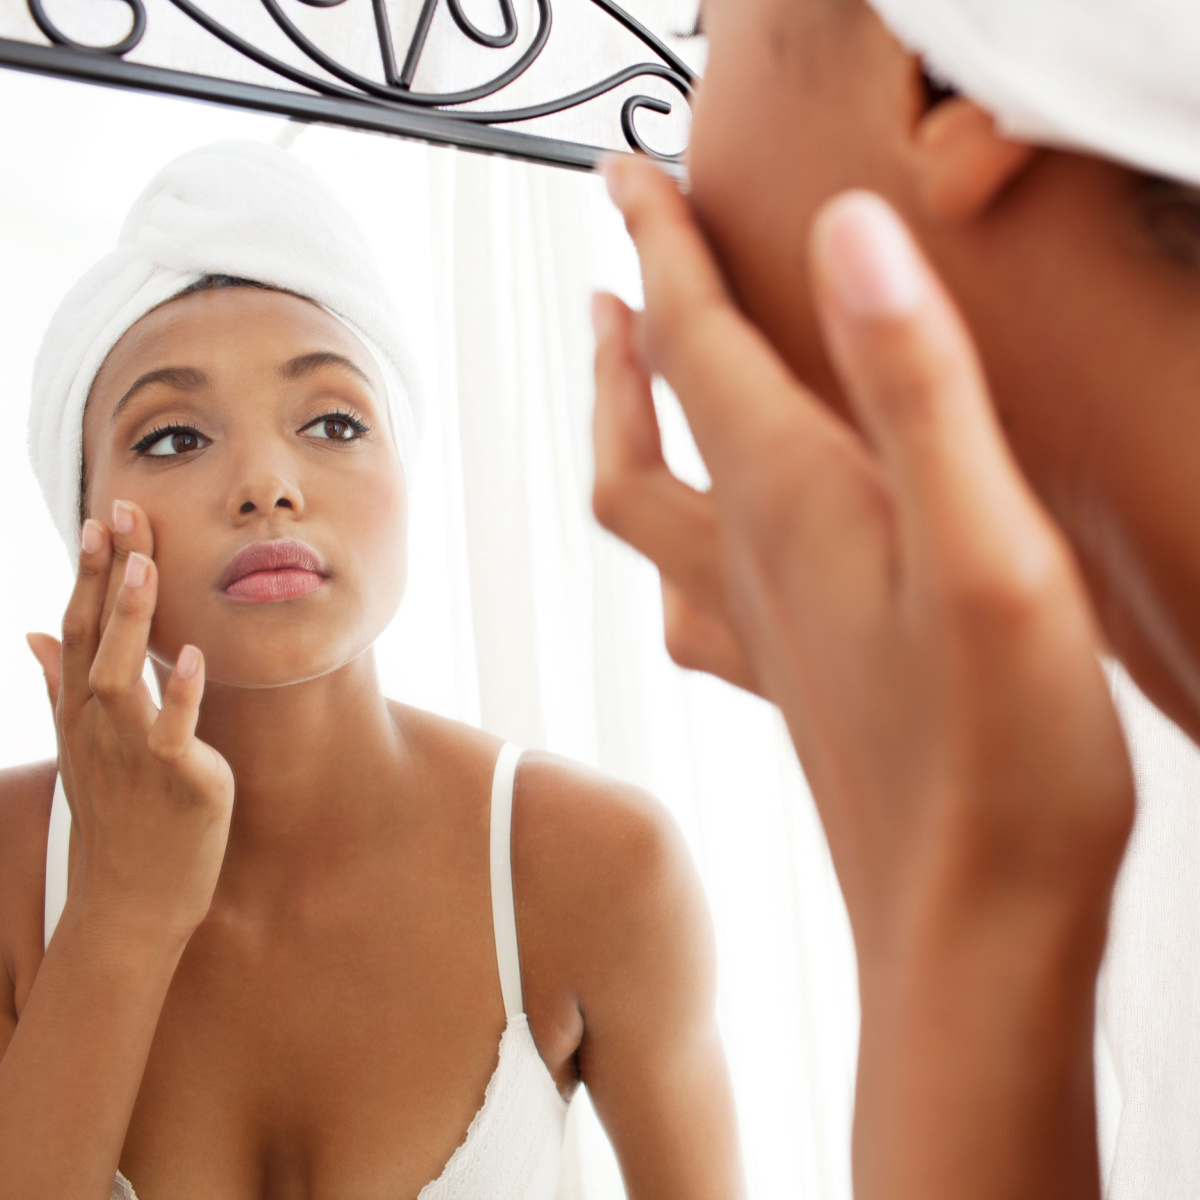 woman looking into mirror touching skin white towel